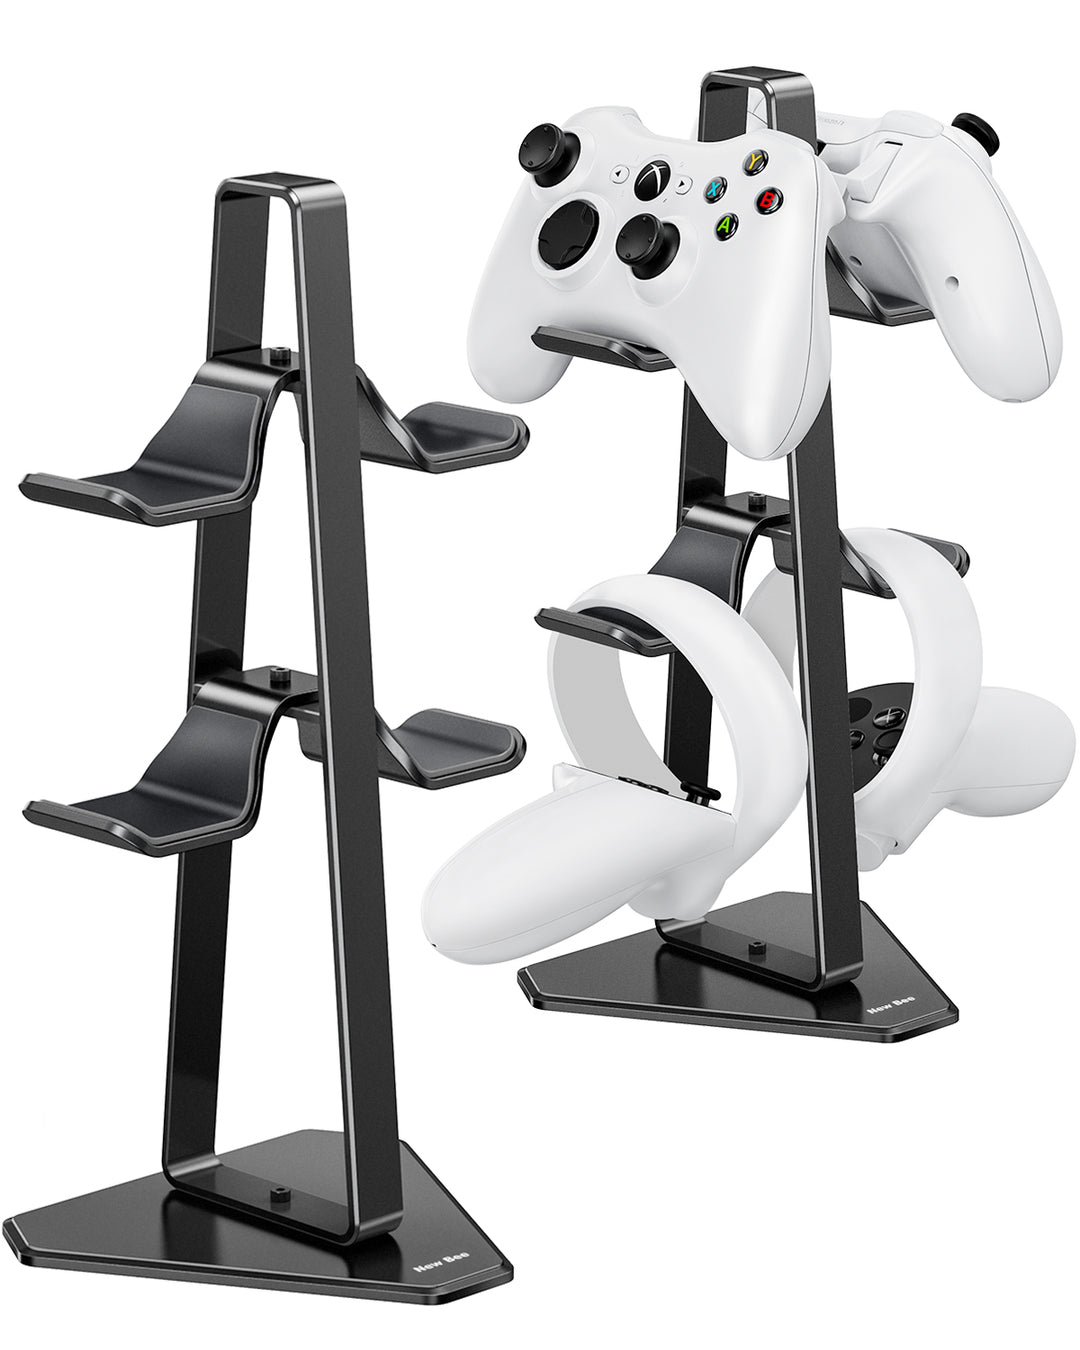 New Bee PlayStation Controller Organizer for Desk, Display Storage Stand for PS5/ PS4/Xbox Series/Nintendo Switch, Black